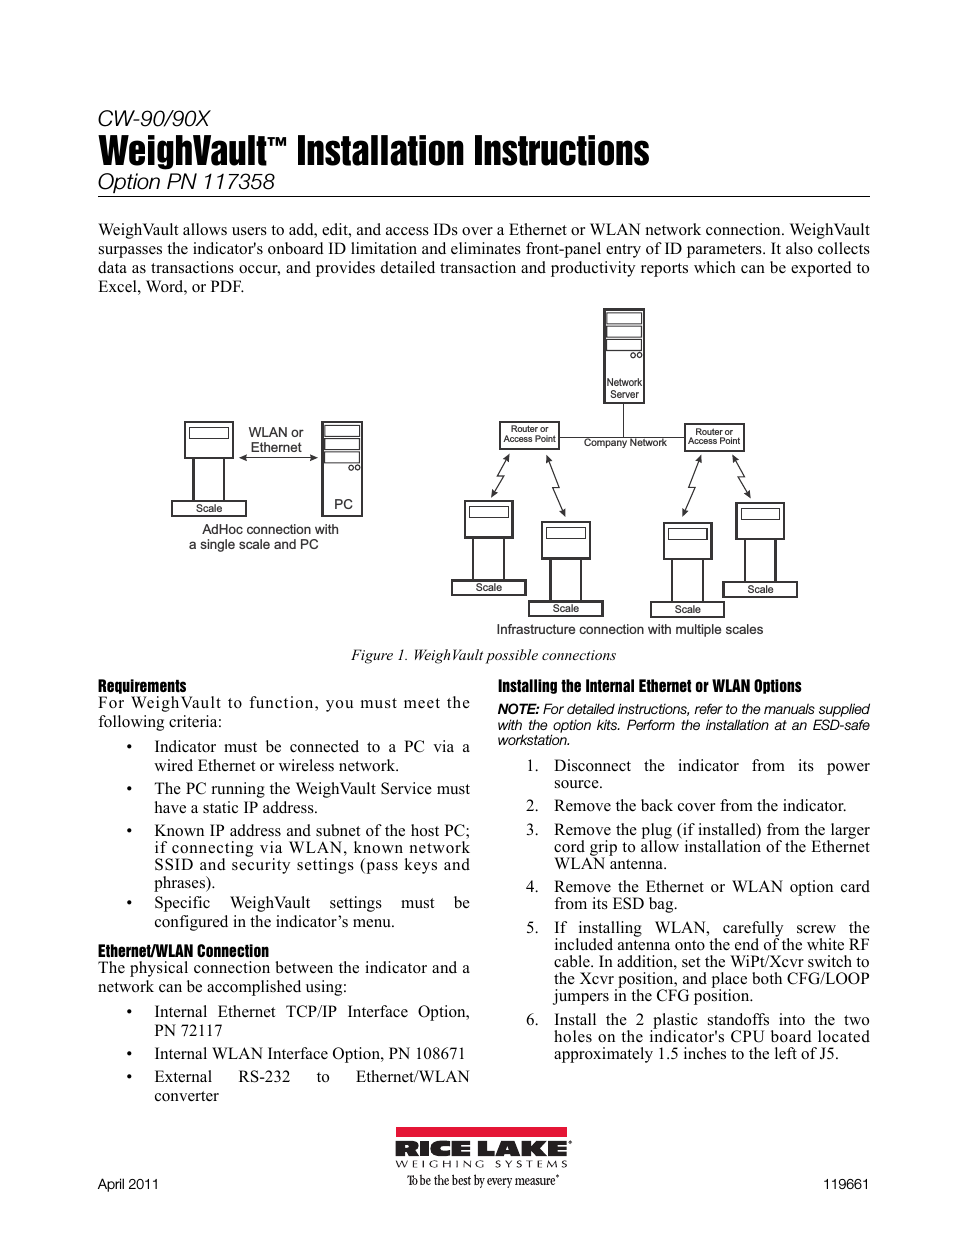 WeighVault for CW-90/CW-90X - Installation Instructions